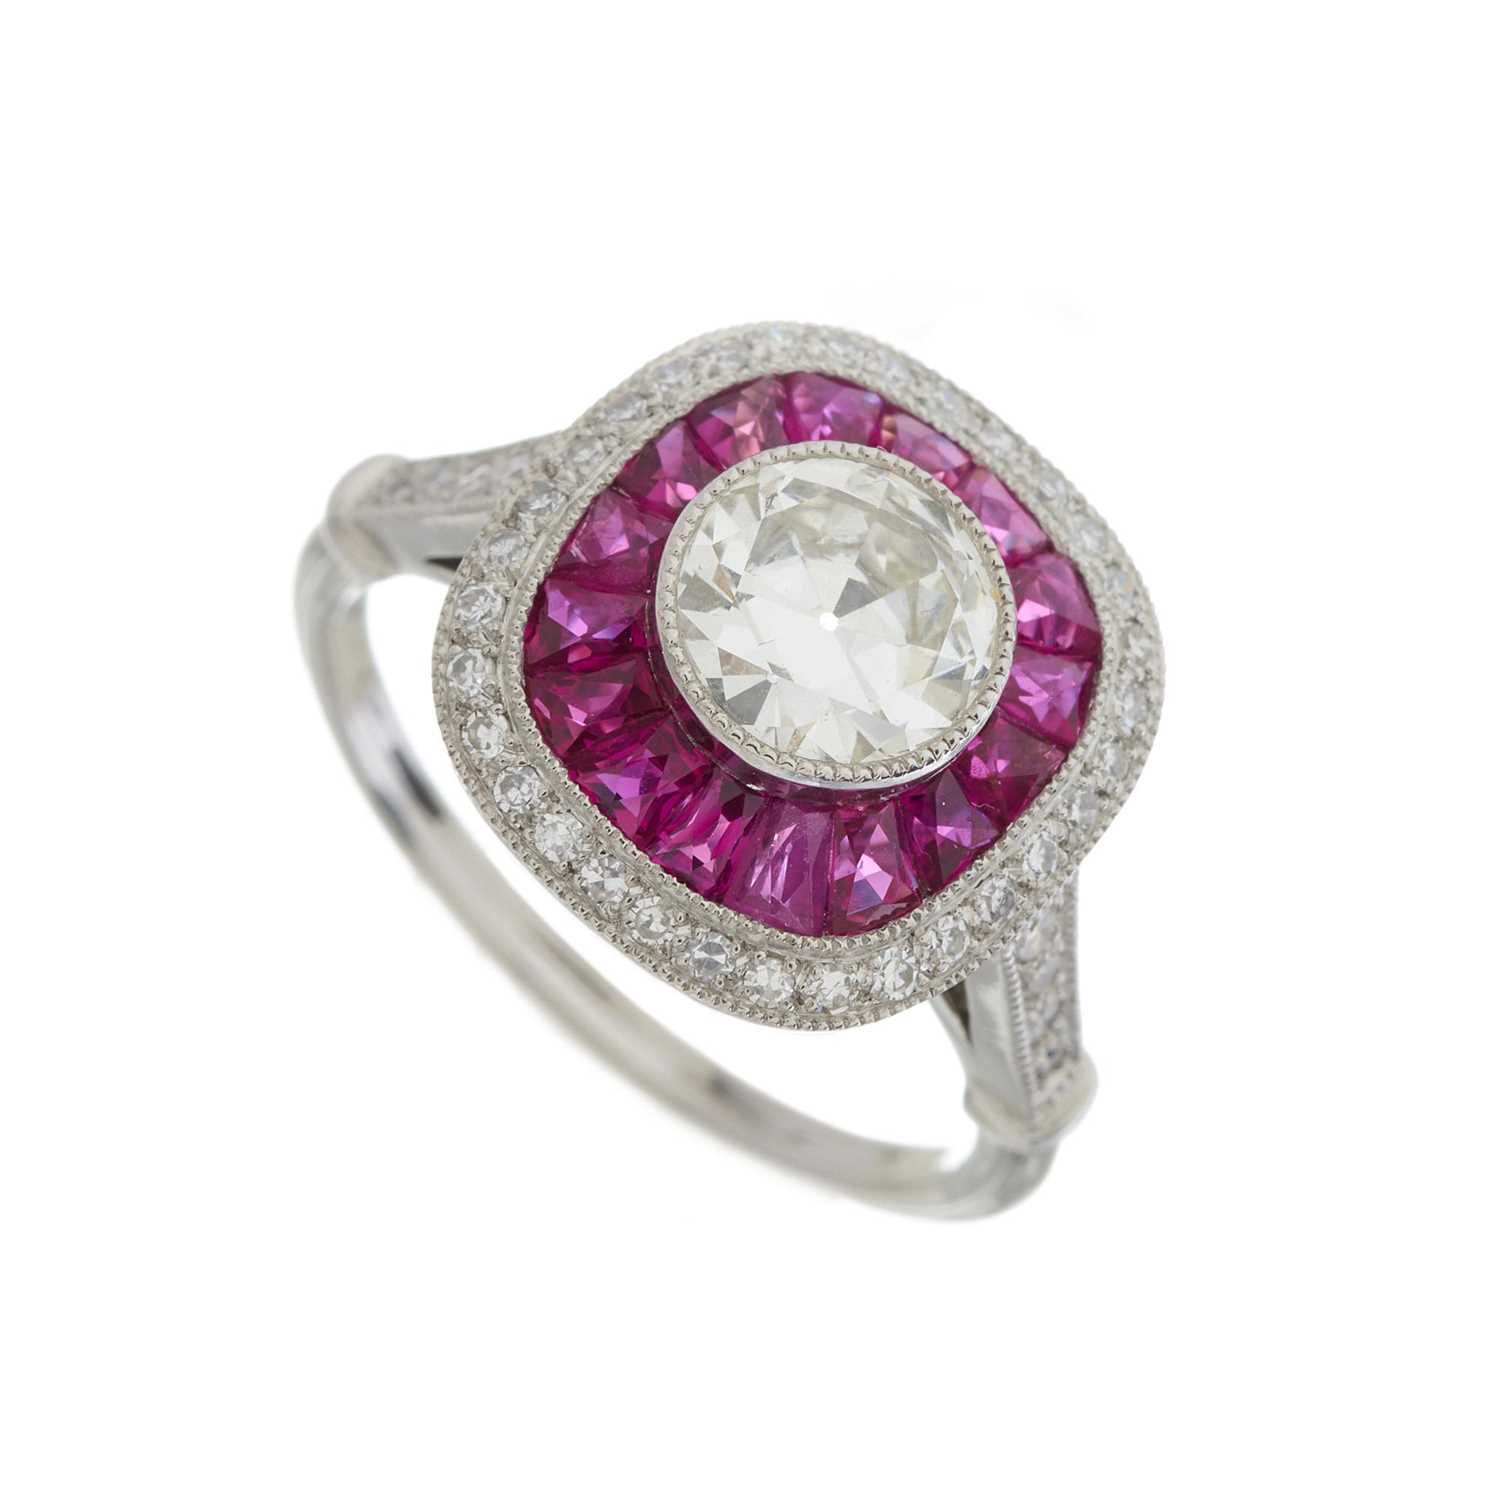 A platinum diamond and ruby cluster dress ring - Image 3 of 3